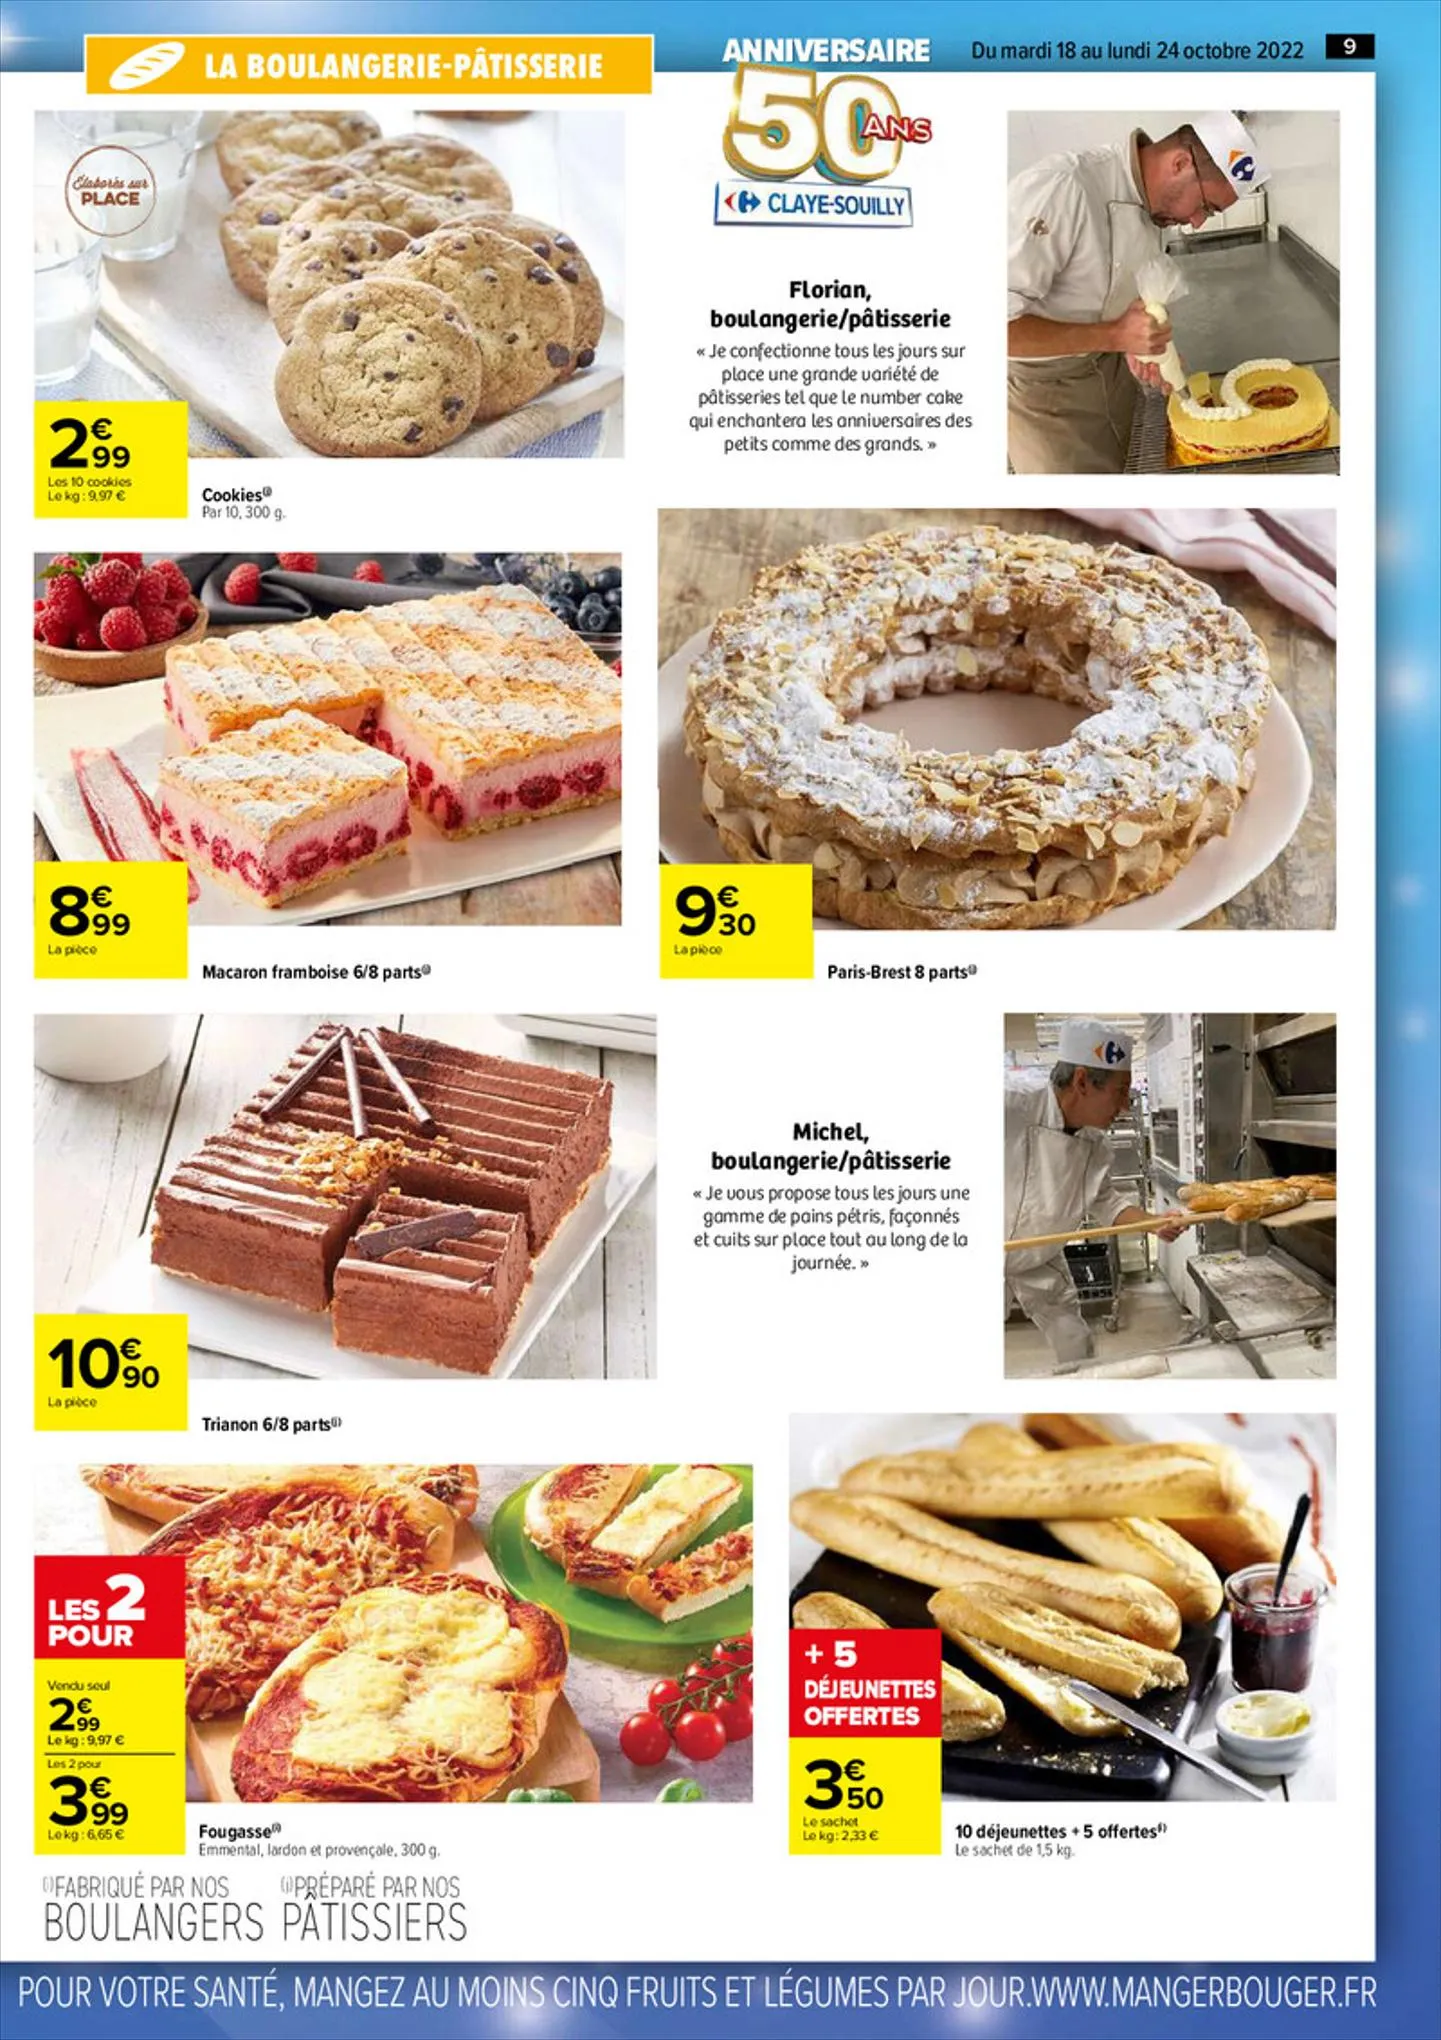 Catalogue Anniversaire 50 Ans Claye-Souilly, page 00009